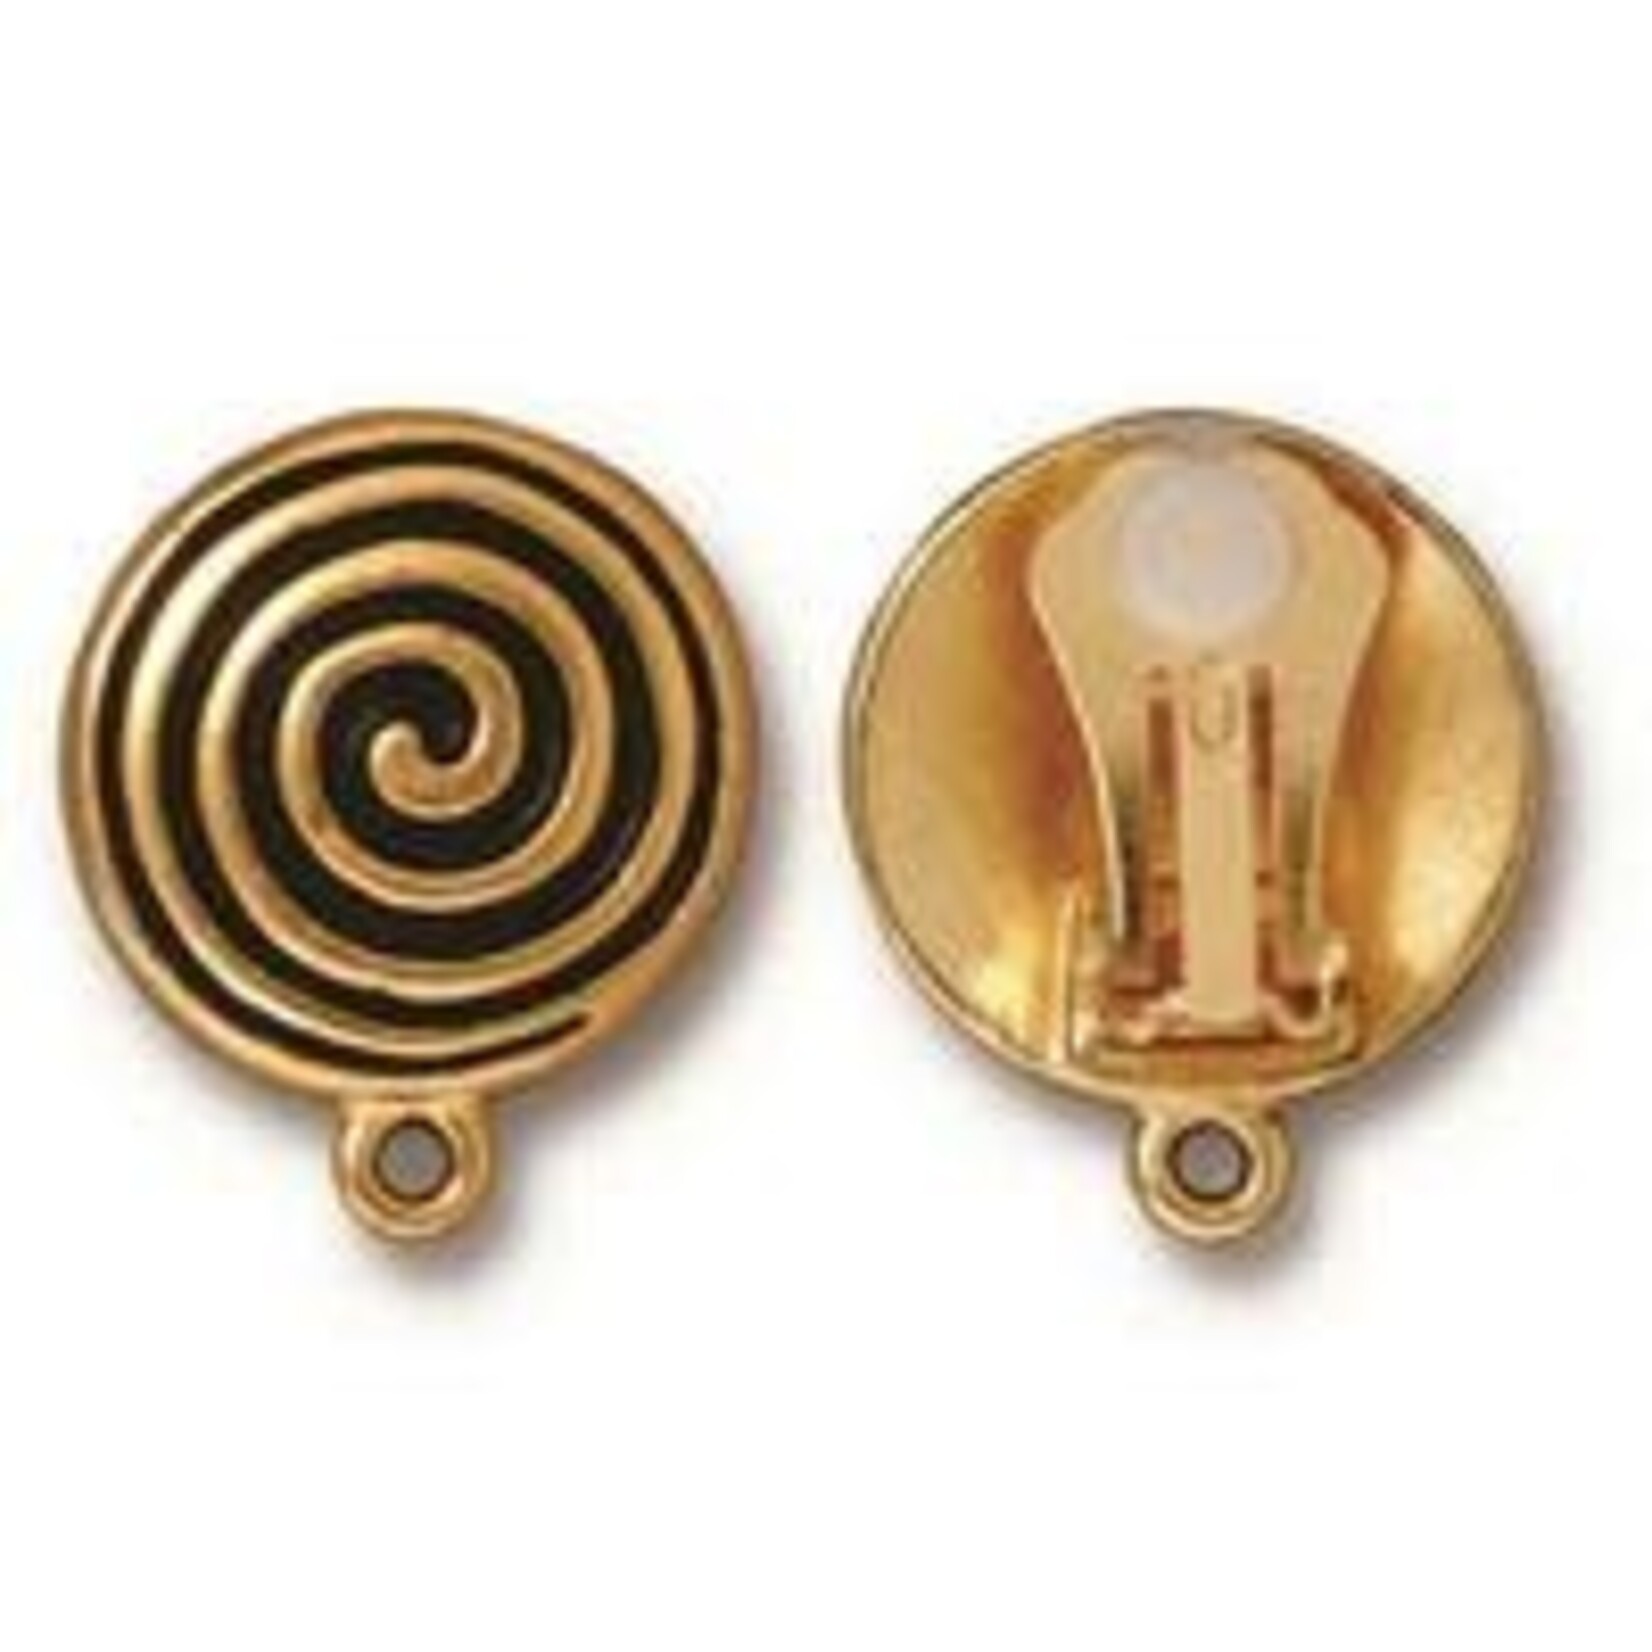 TierraCast Spiral Earring Clip Antique Gold Plated - Pair